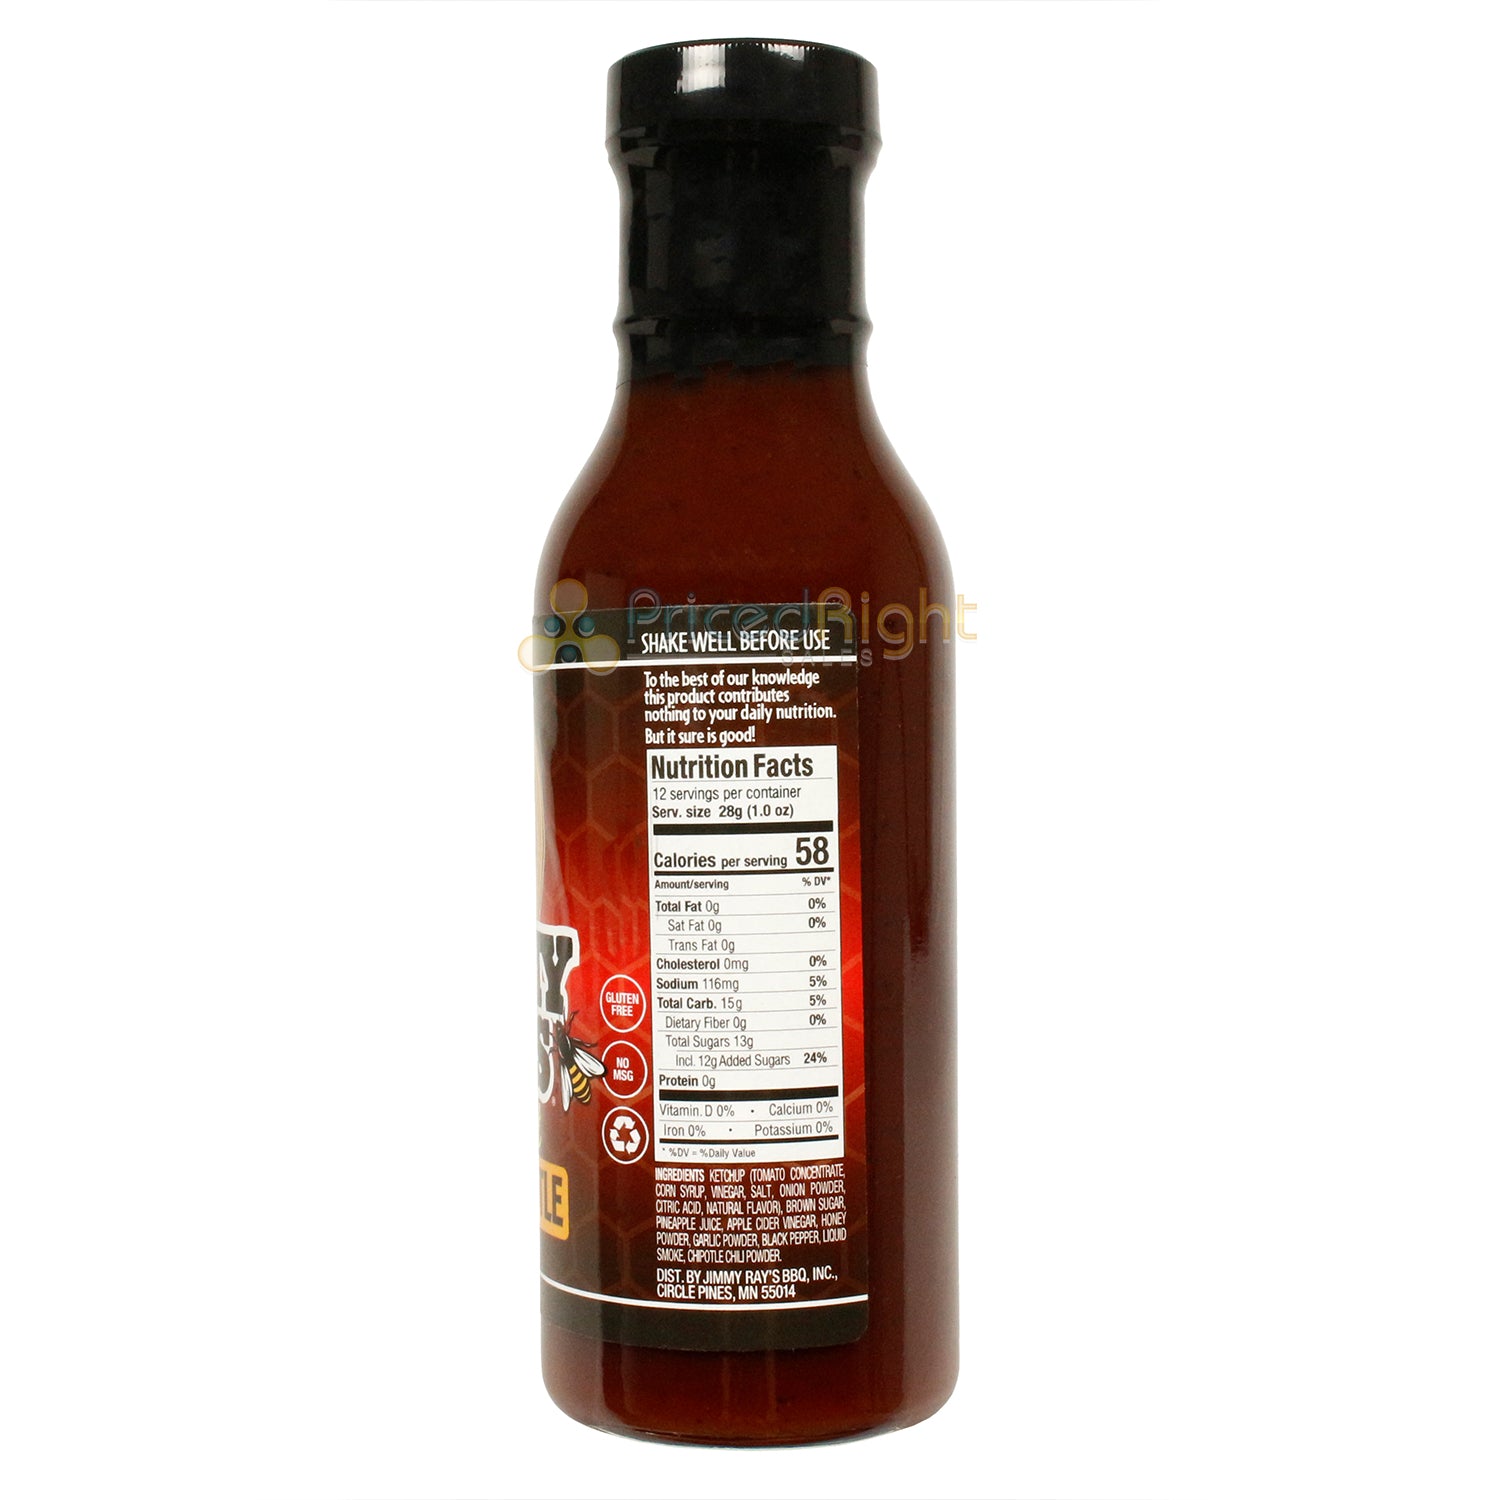 Jimmy Ray's Spicy Sweet Honey Chipotle Sauce Smoky Spice Gluten Free No MSG 12oz